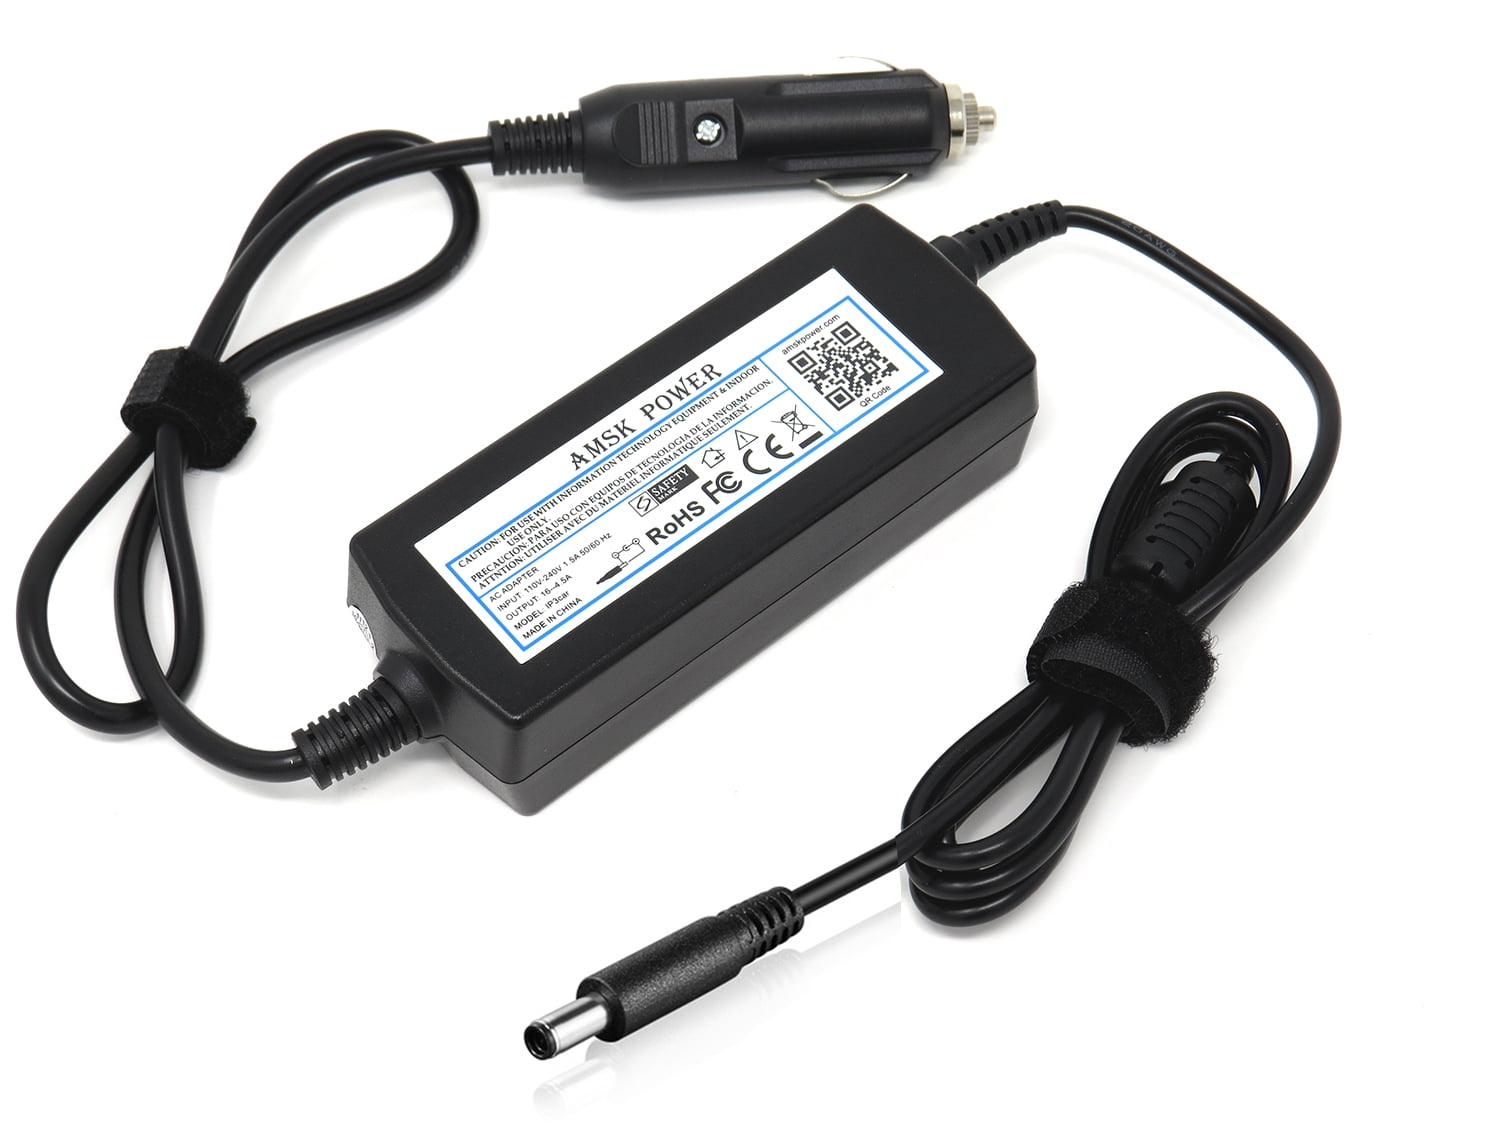 Notebook Laptop Charger Car DC USB Universal Power Lithium Battery Recharger 